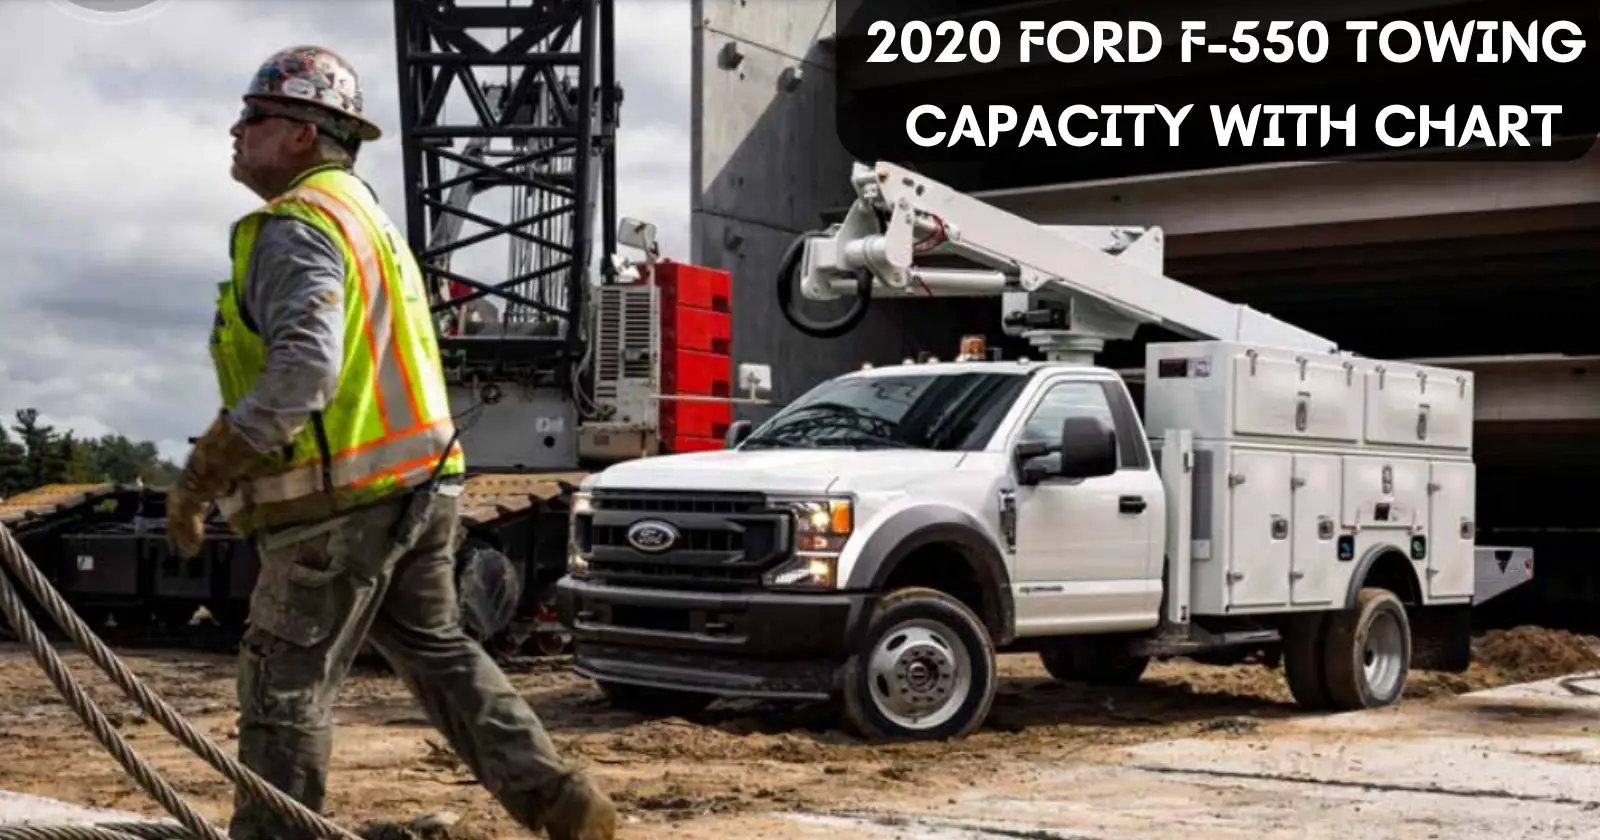 2020-ford-f-550-towing-capacity-with-chart-thecartowing